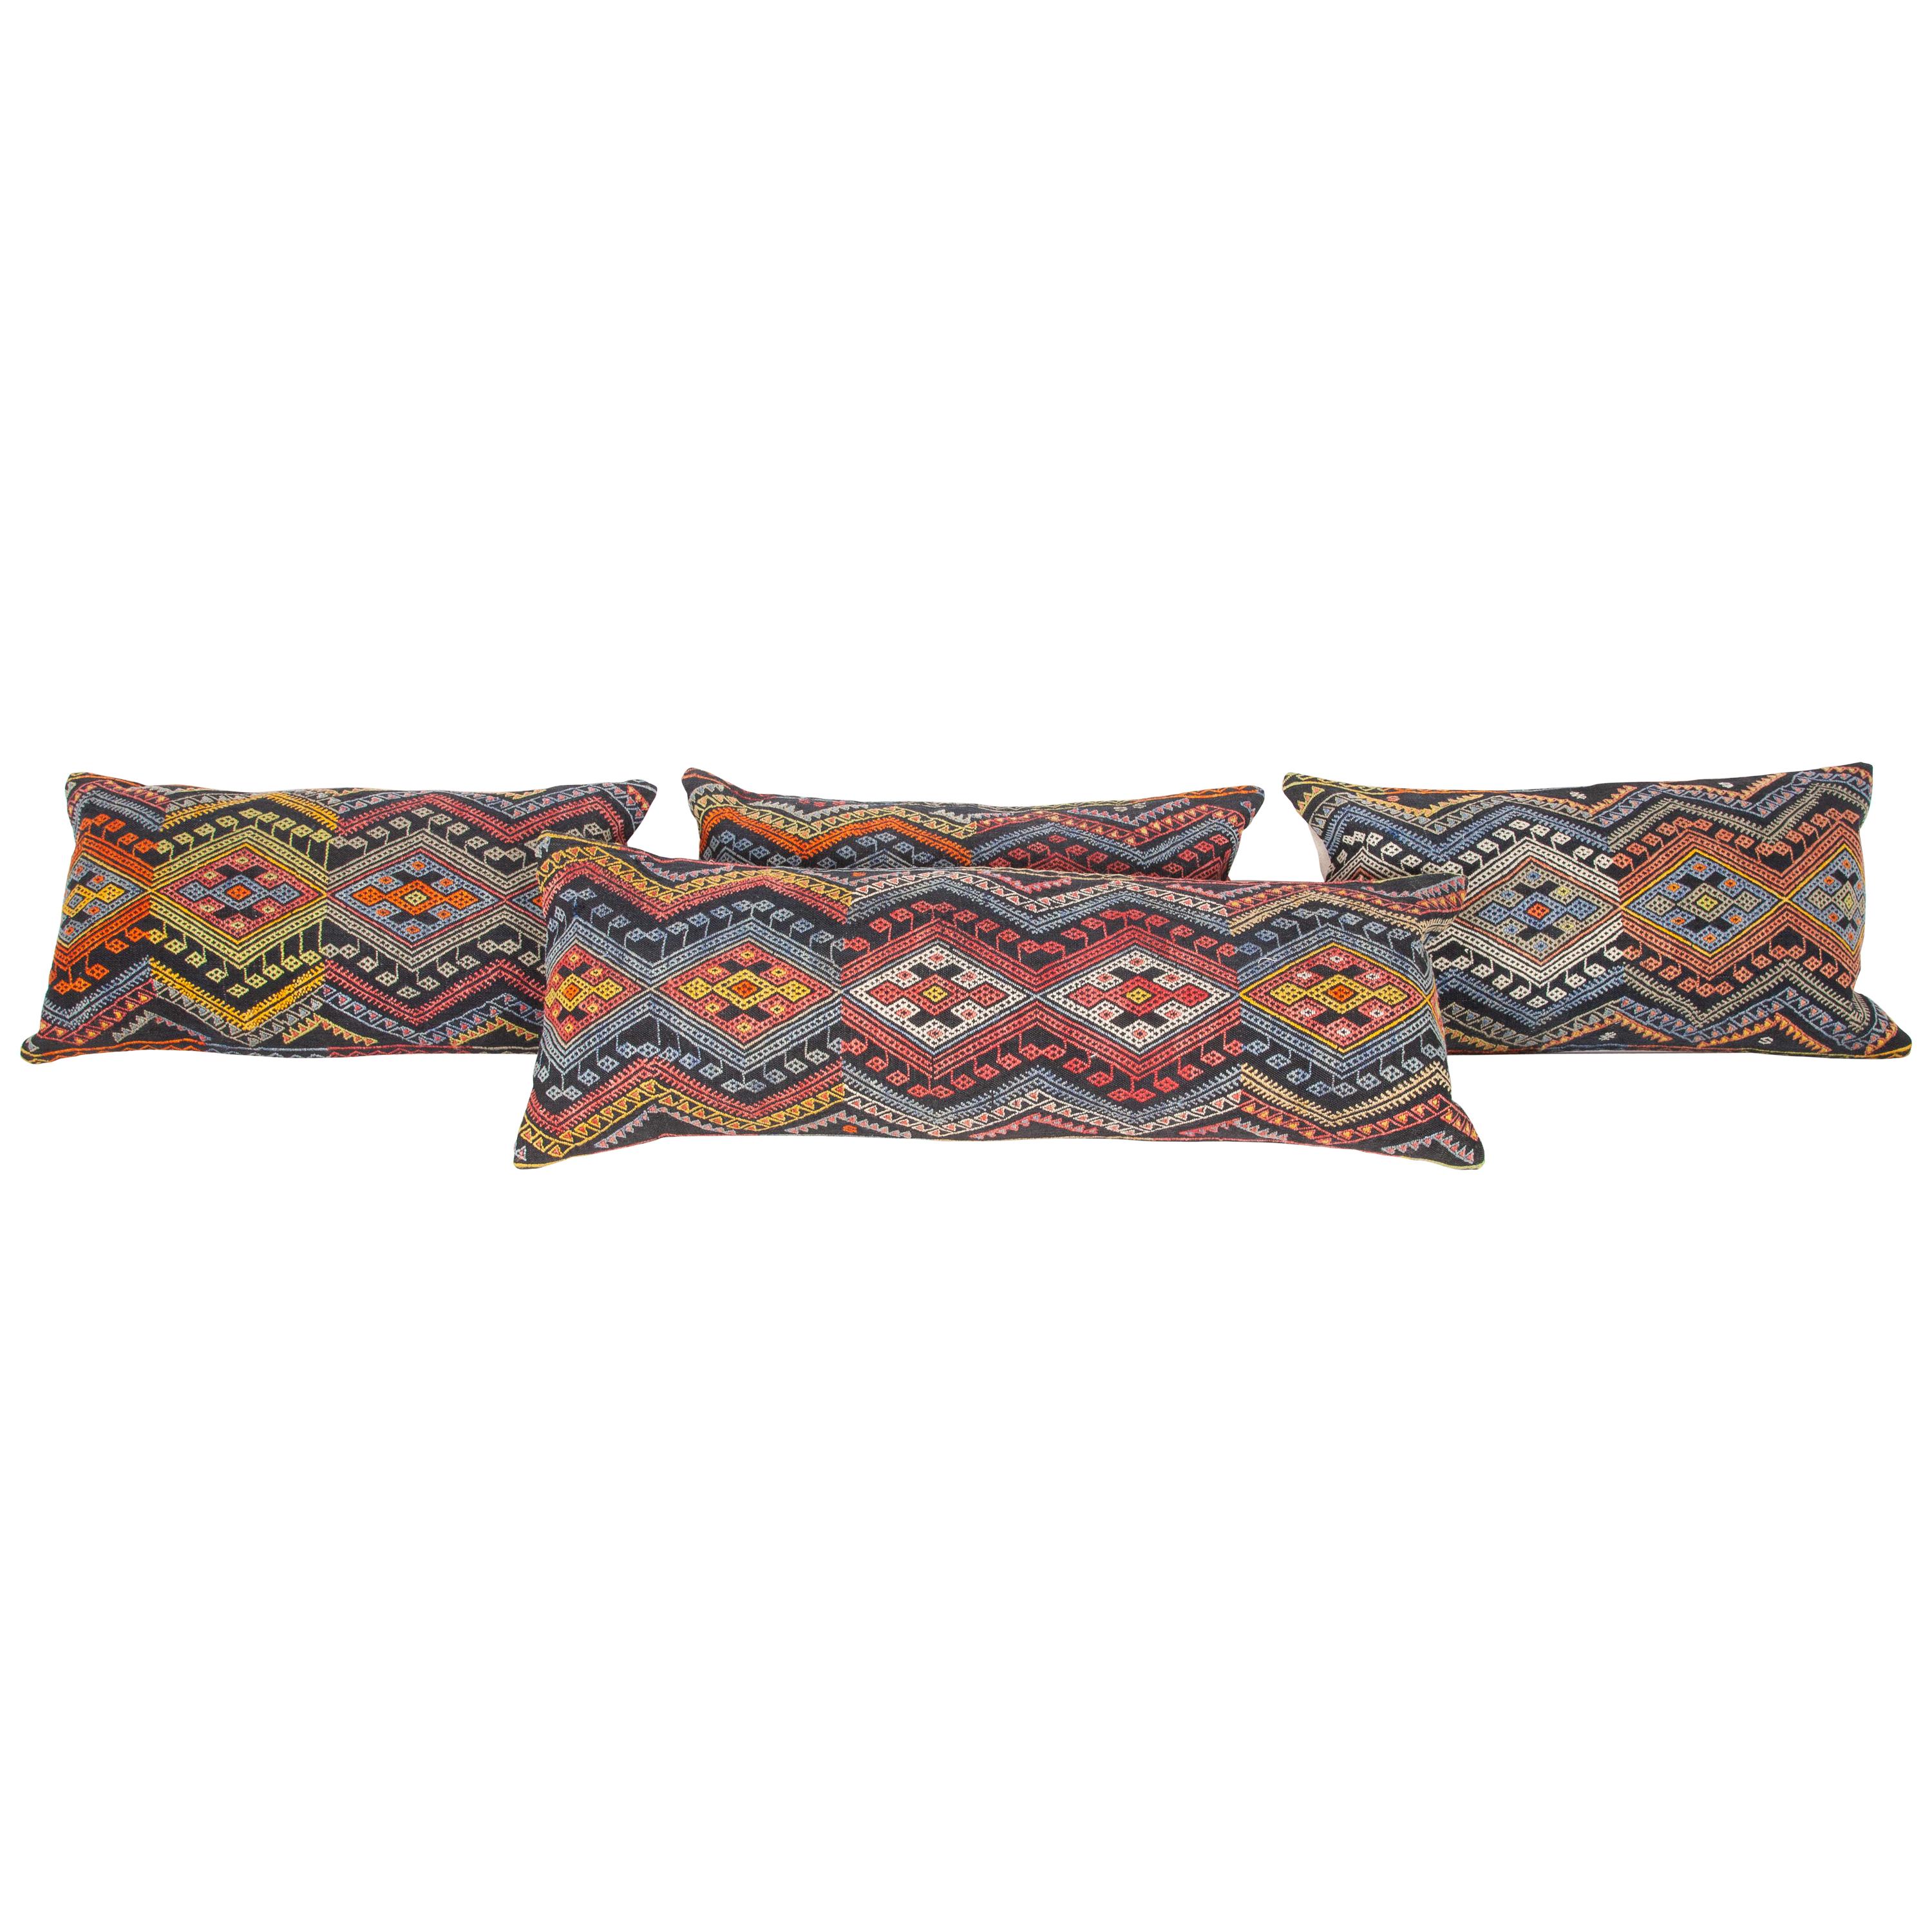 Antique Kilim Pillow Cases Made from a Late 19th Century Anatolian Cicim Kilim